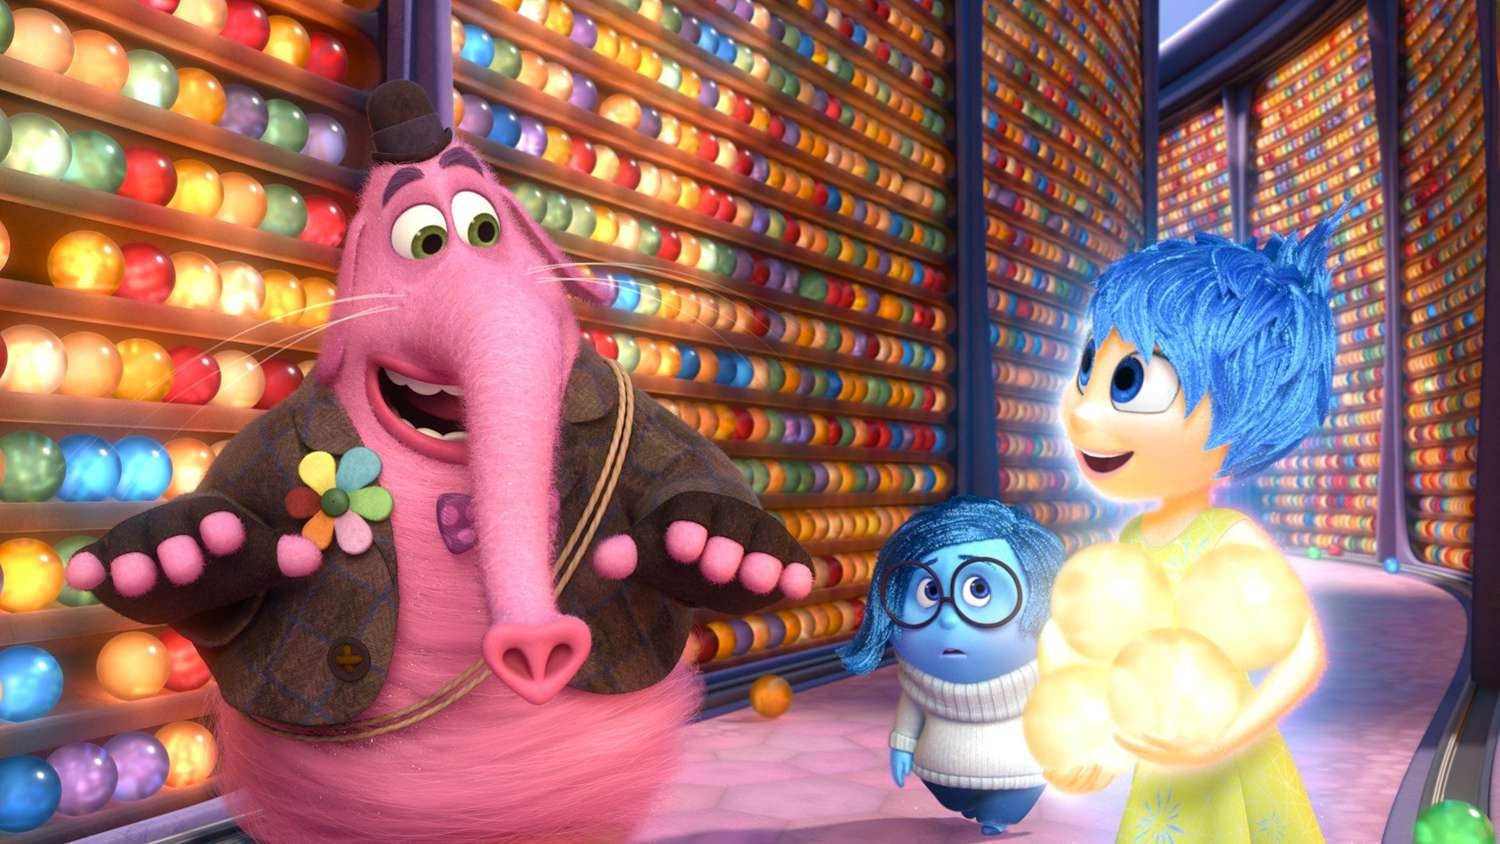 Richard King's character Bing Bong in a still from Inside Out | Pixar Animation Studios